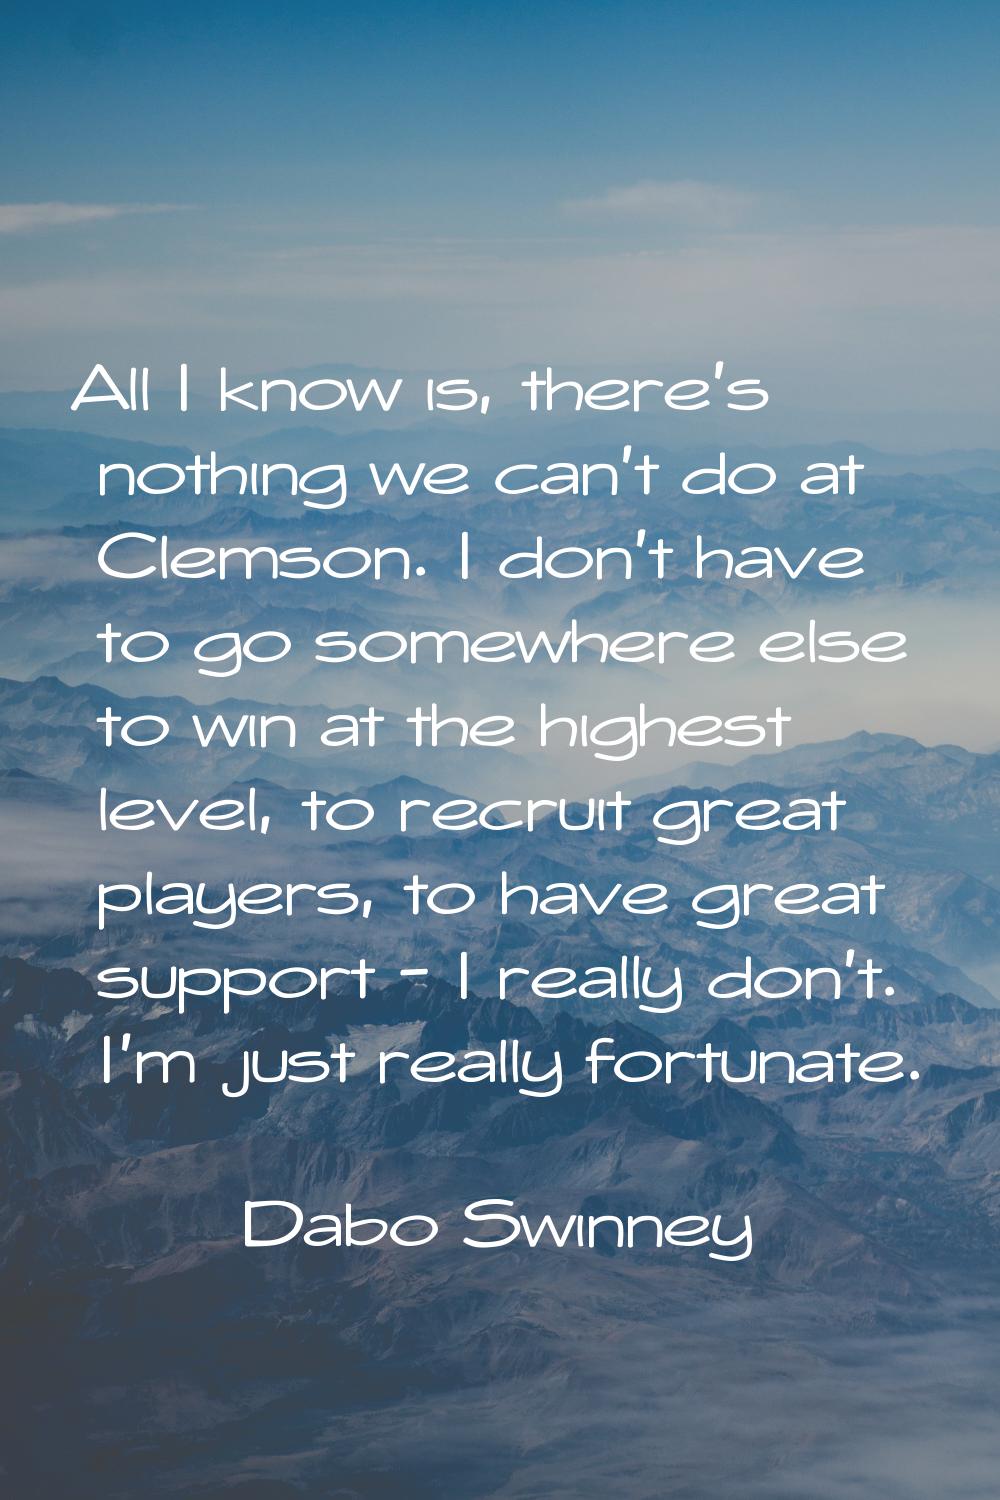 All I know is, there's nothing we can't do at Clemson. I don't have to go somewhere else to win at 